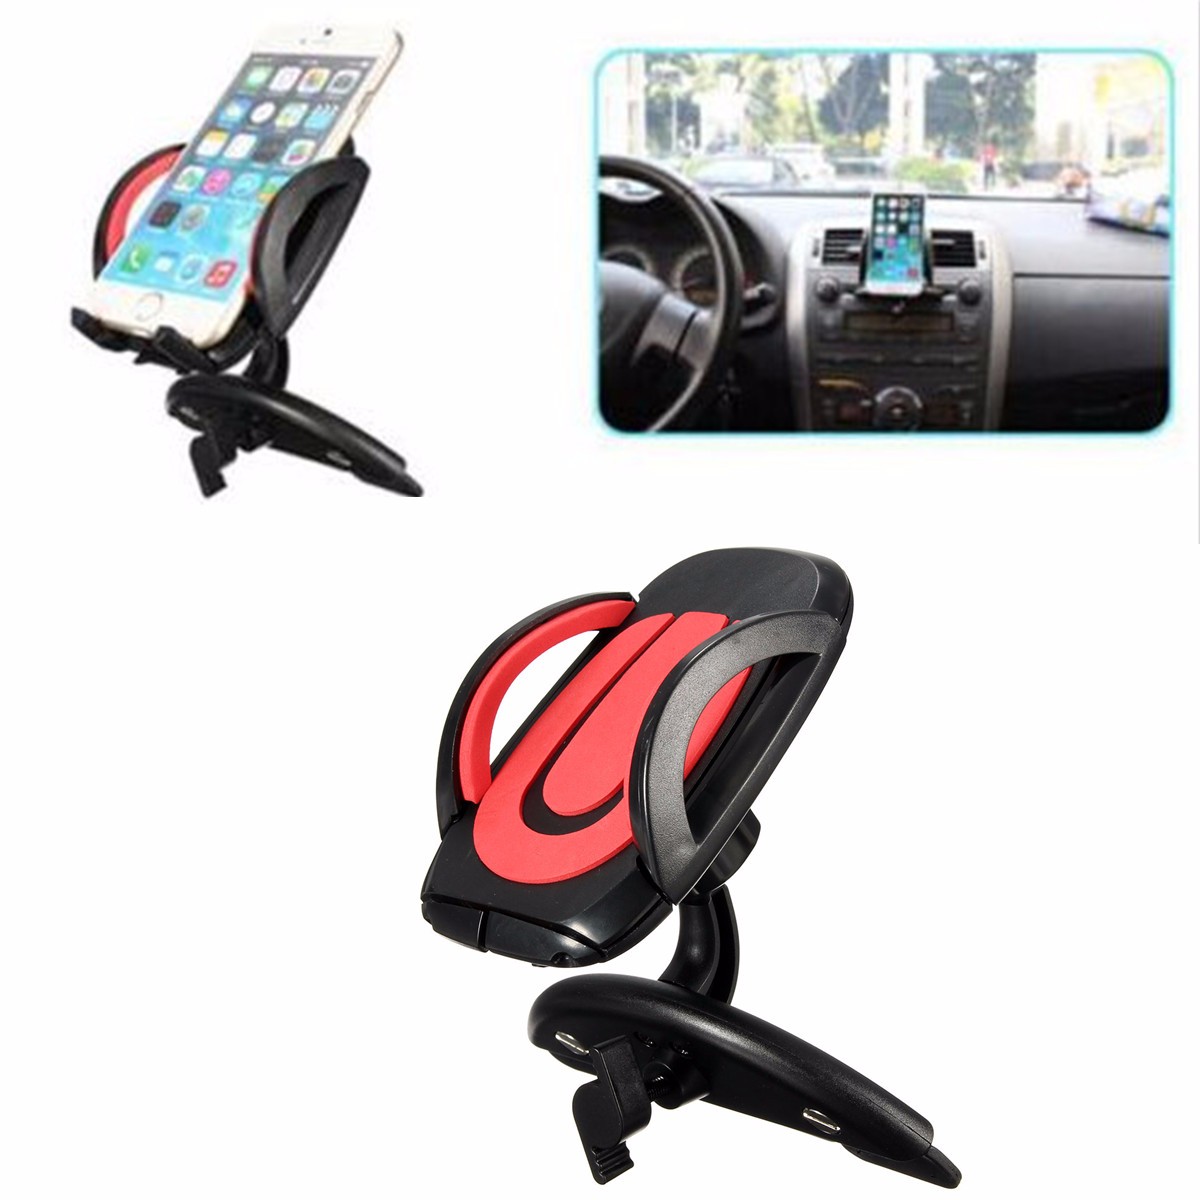 ELEGIANT Car CD Slot Holder Dash Slot Mount Holder Dock Stand For iPhone 12 Pro Max For Samsung Galaxy S21 Note S20 ultra Huawei Mate40 P50 OnePlus 9 Pro